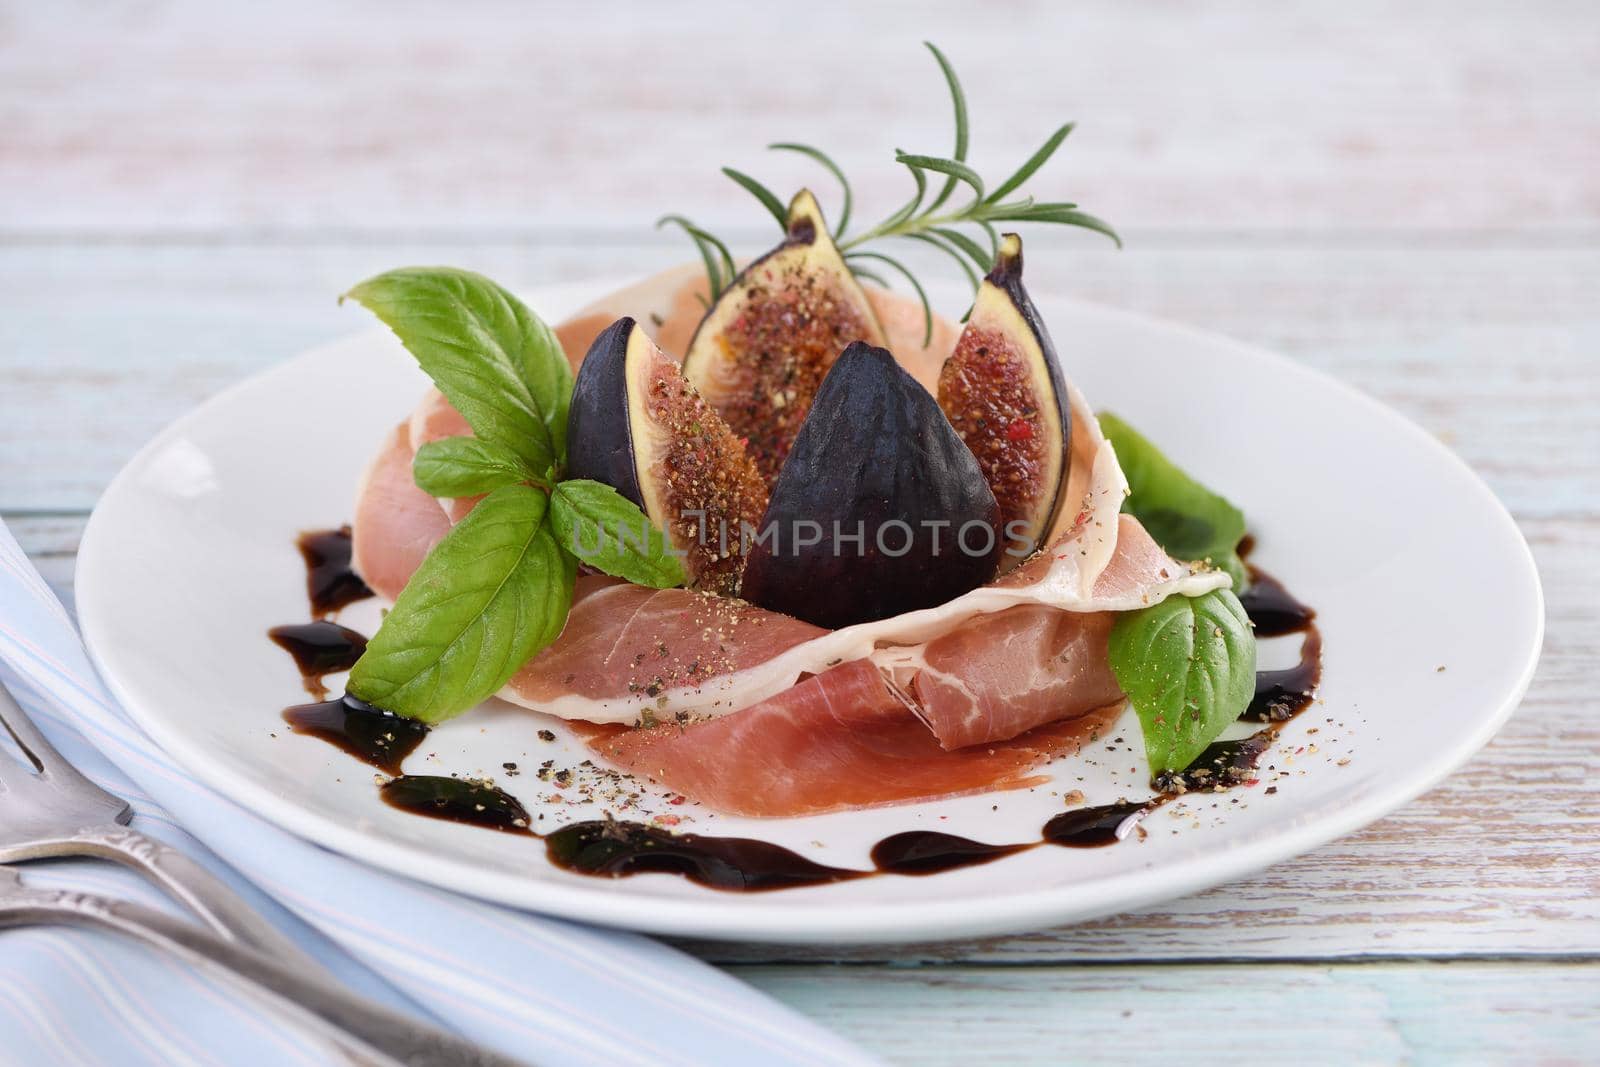 Parma ham and figs by Apolonia